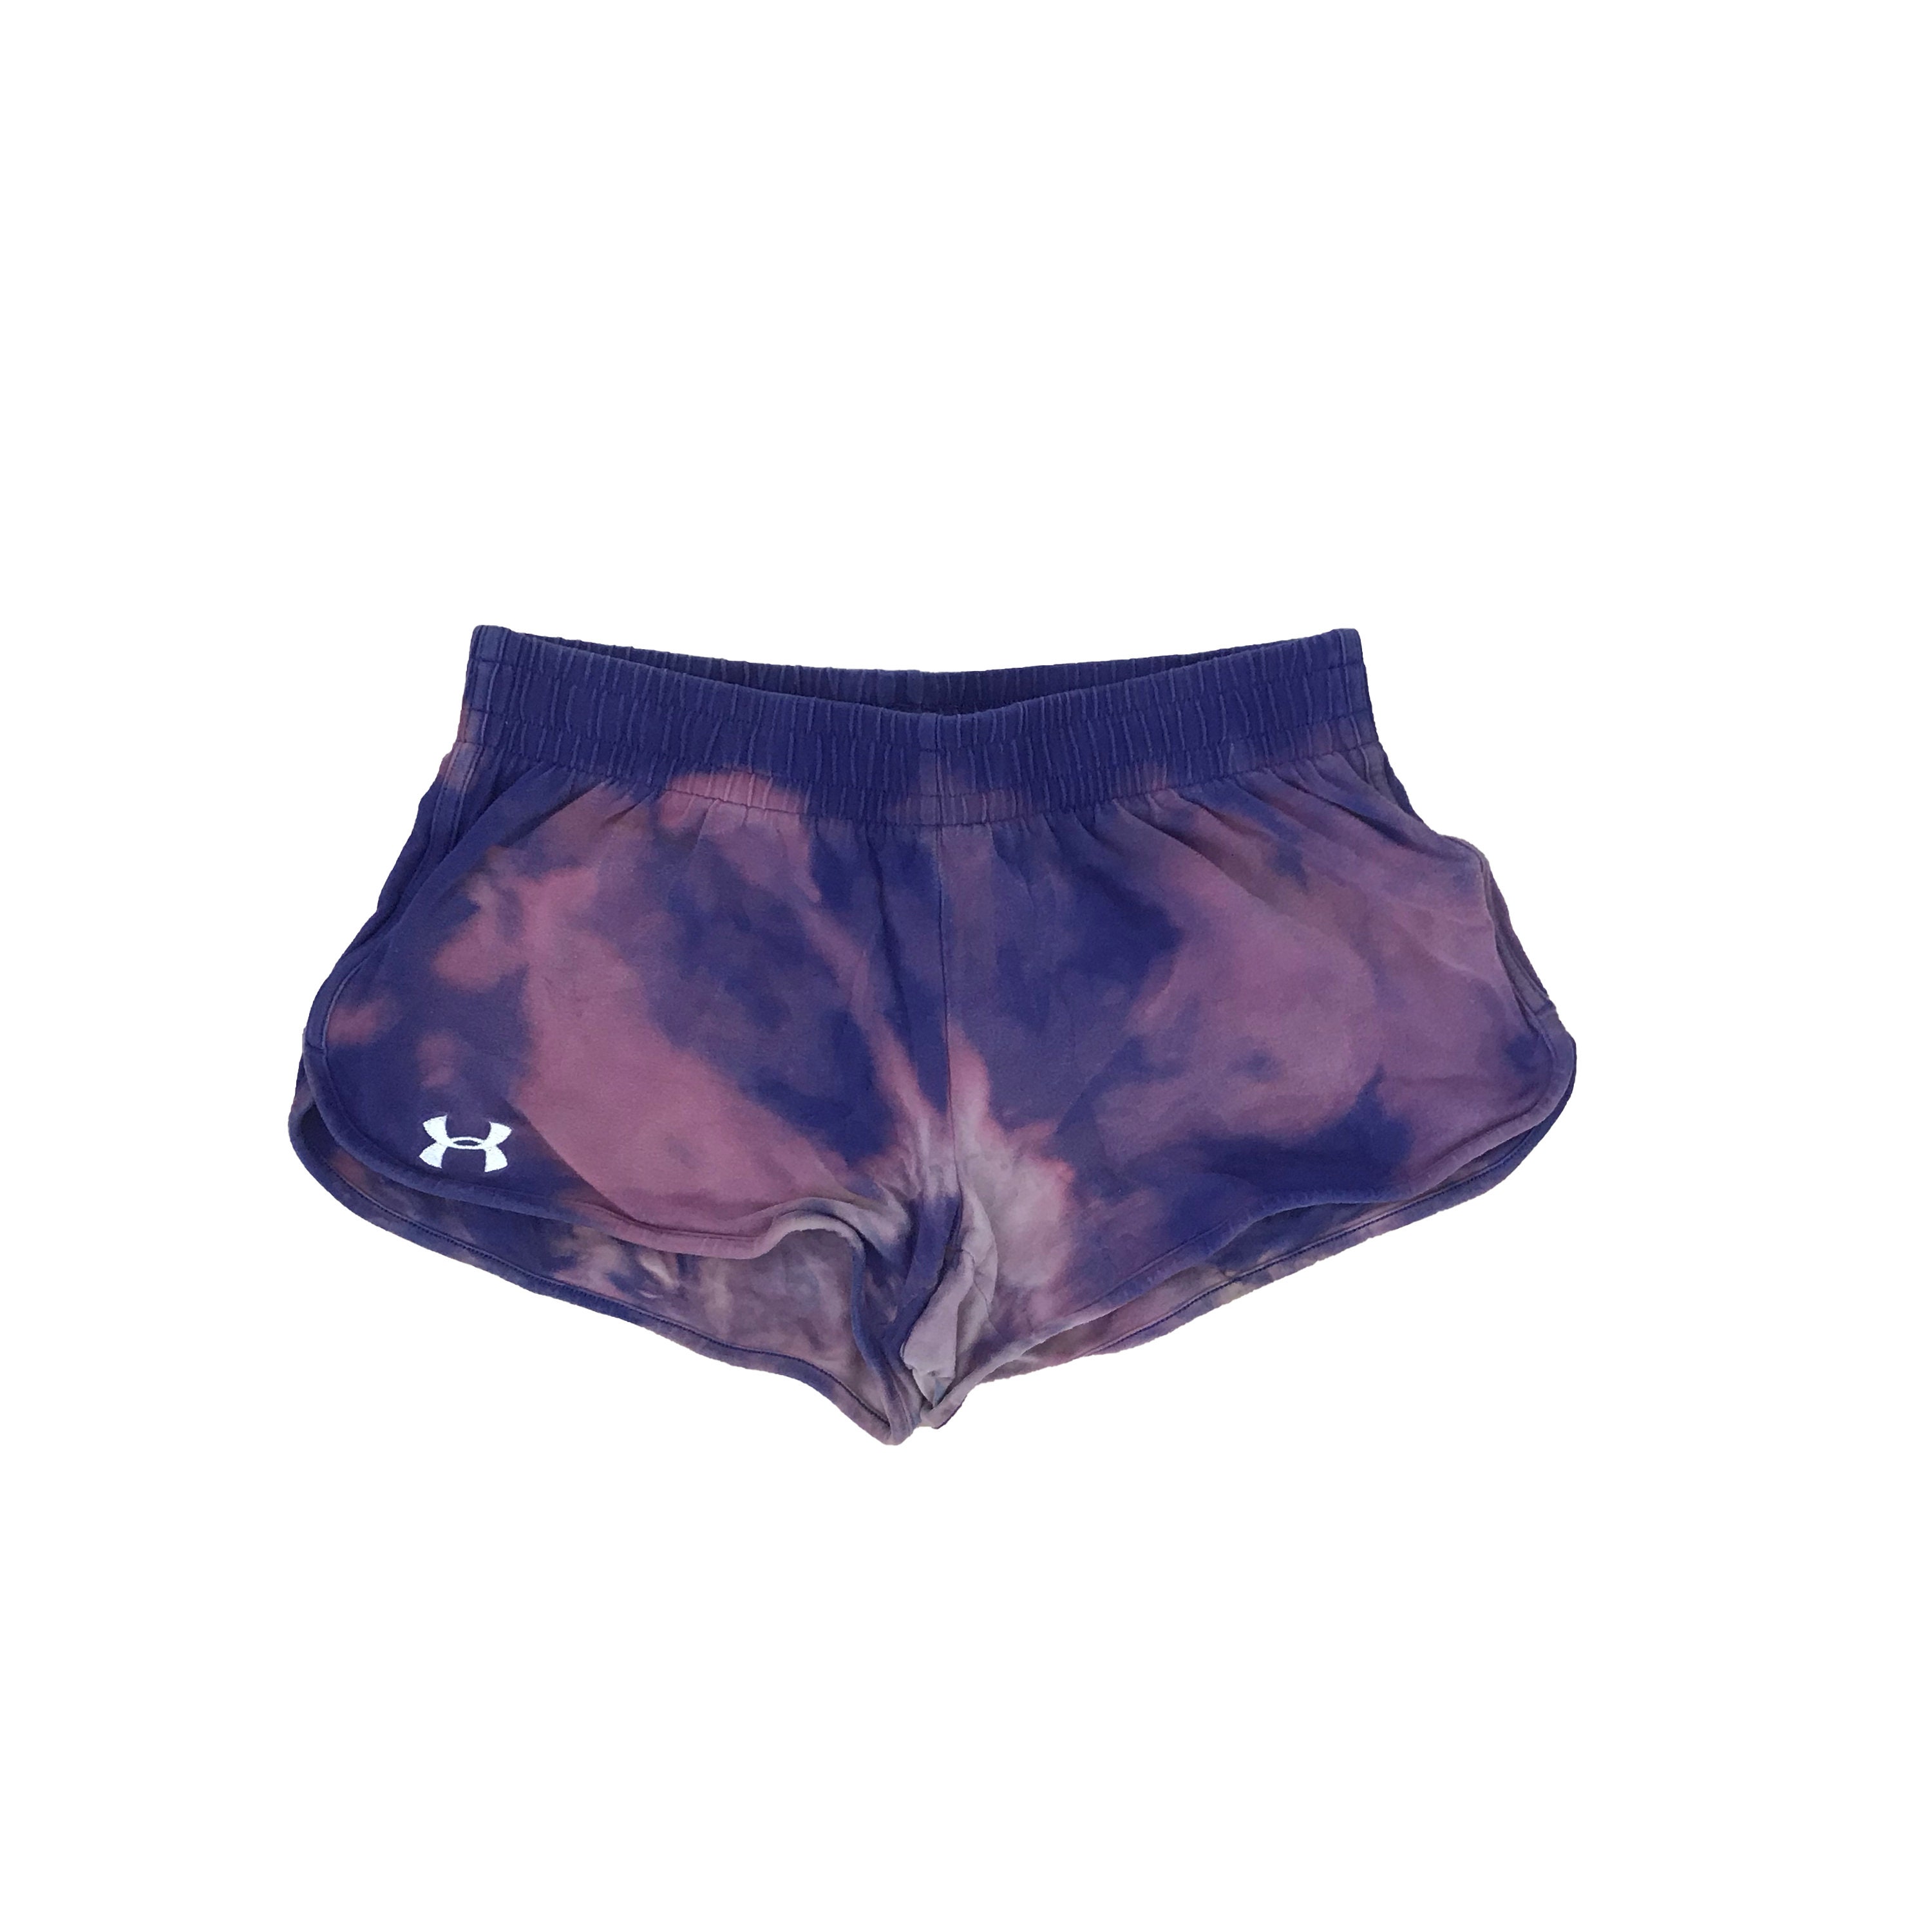 Under Armour Shorts Recycled Cotton - Etsy